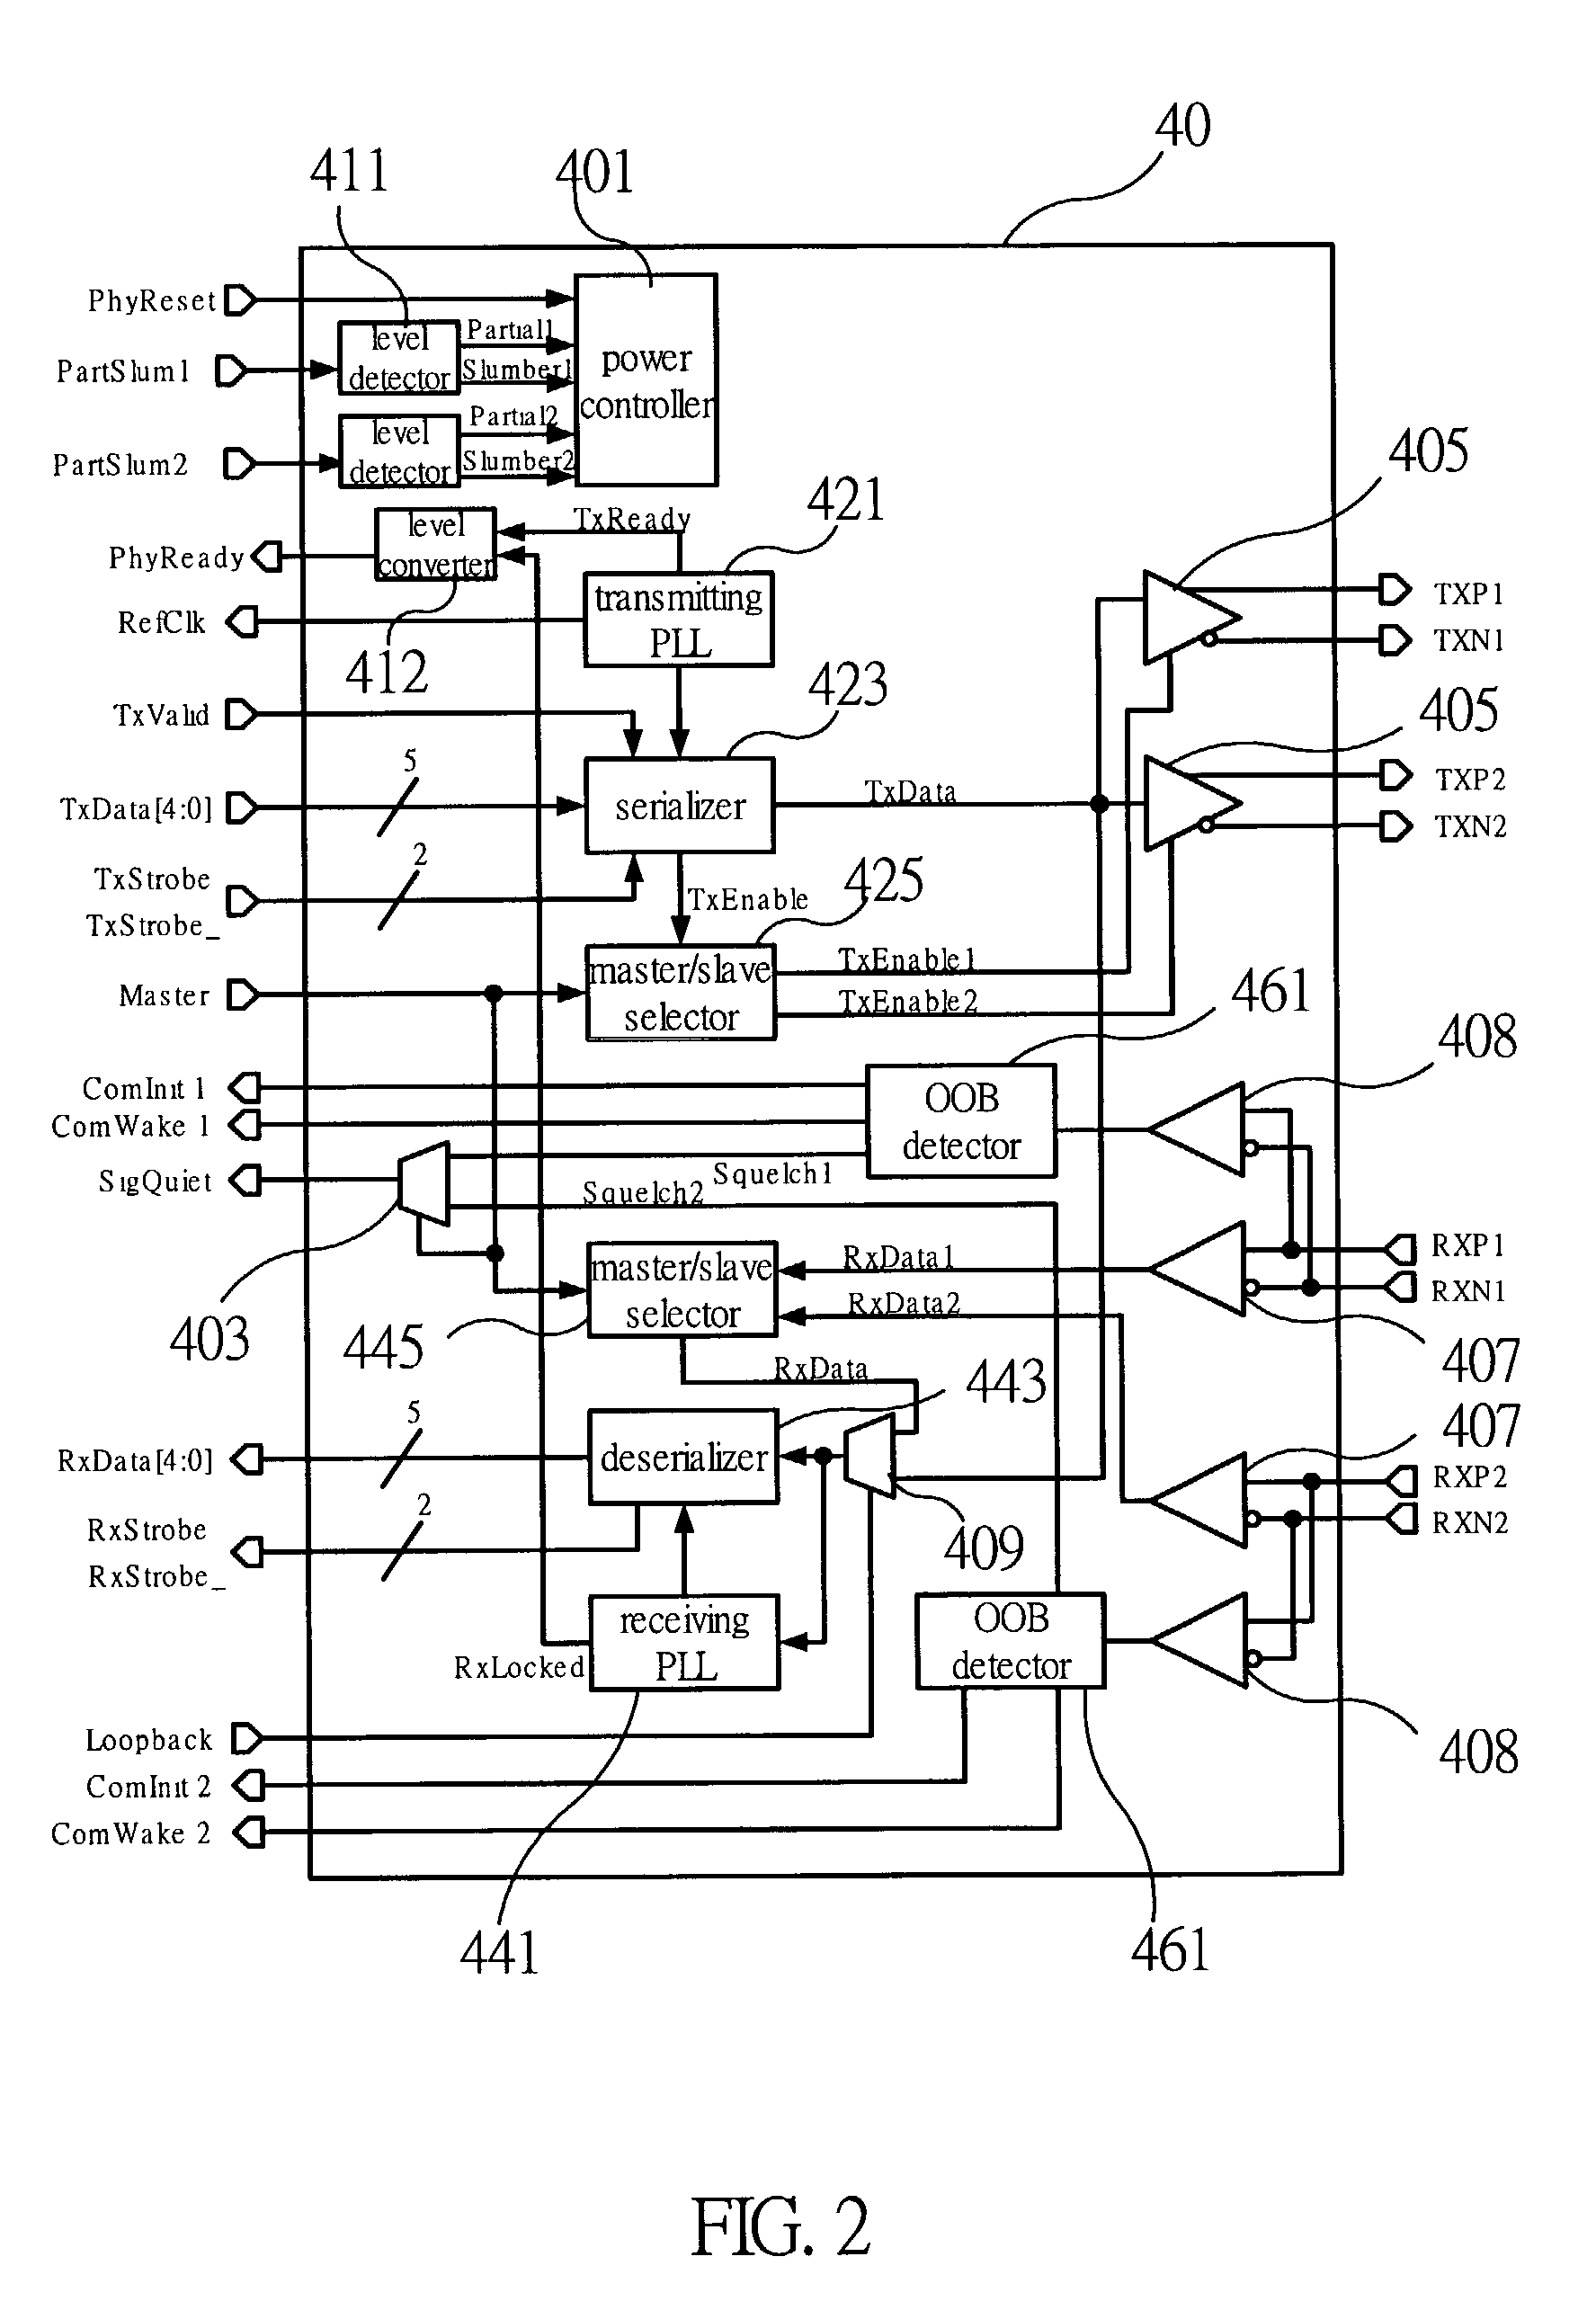 Circuit and signal encoding method for reducing the number of serial ATA external PHY signals